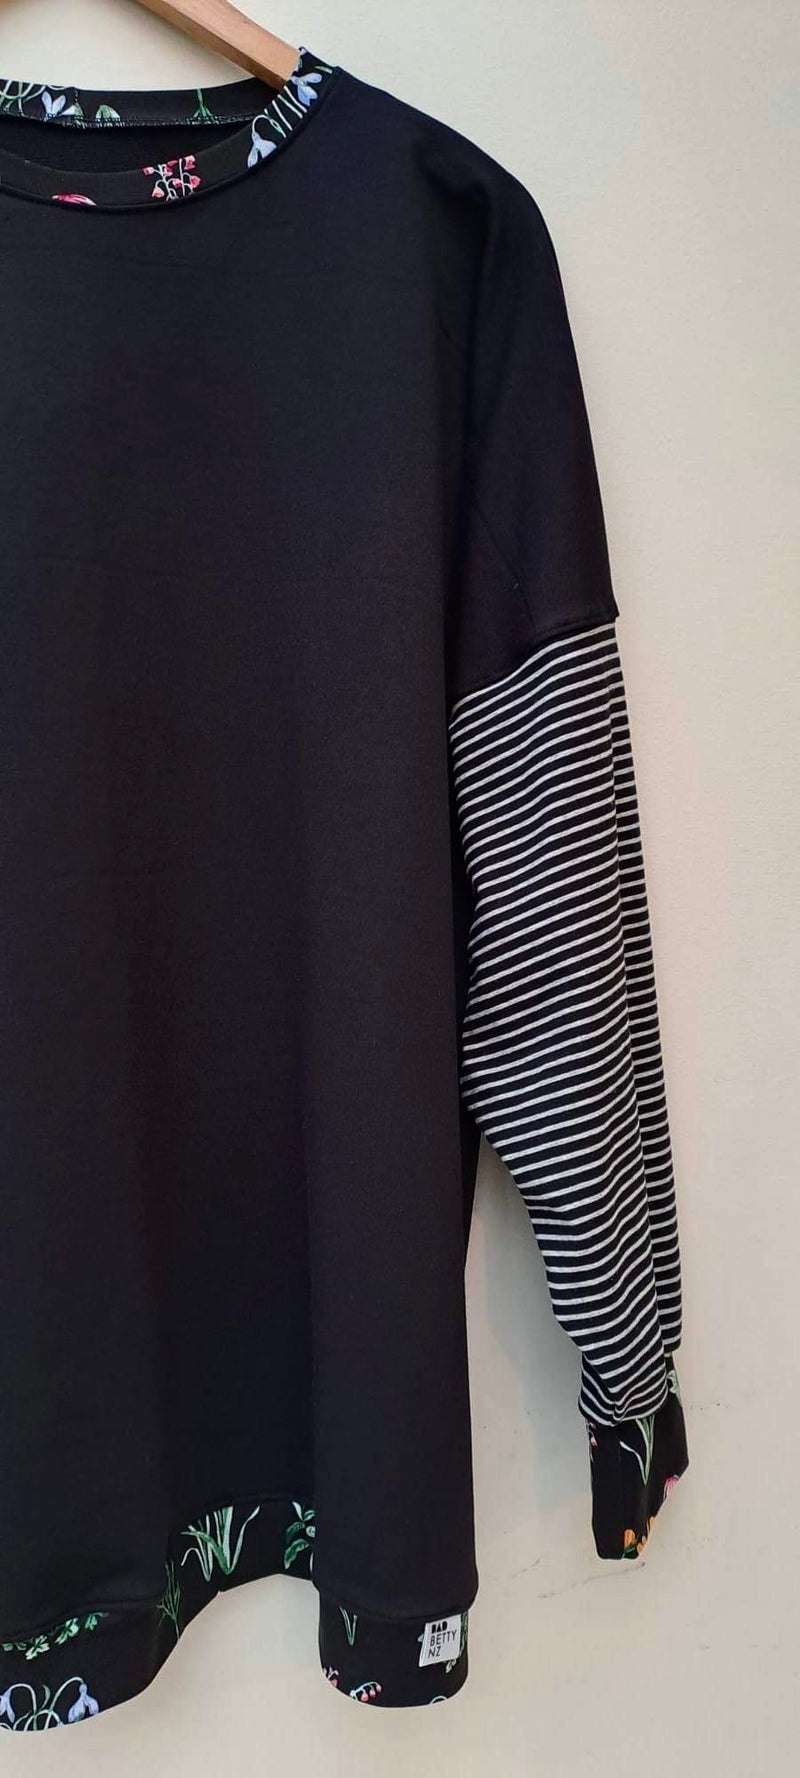 **NEW** OVERSIZED SWEATSHIRT IN BLACK WITH STRIPES